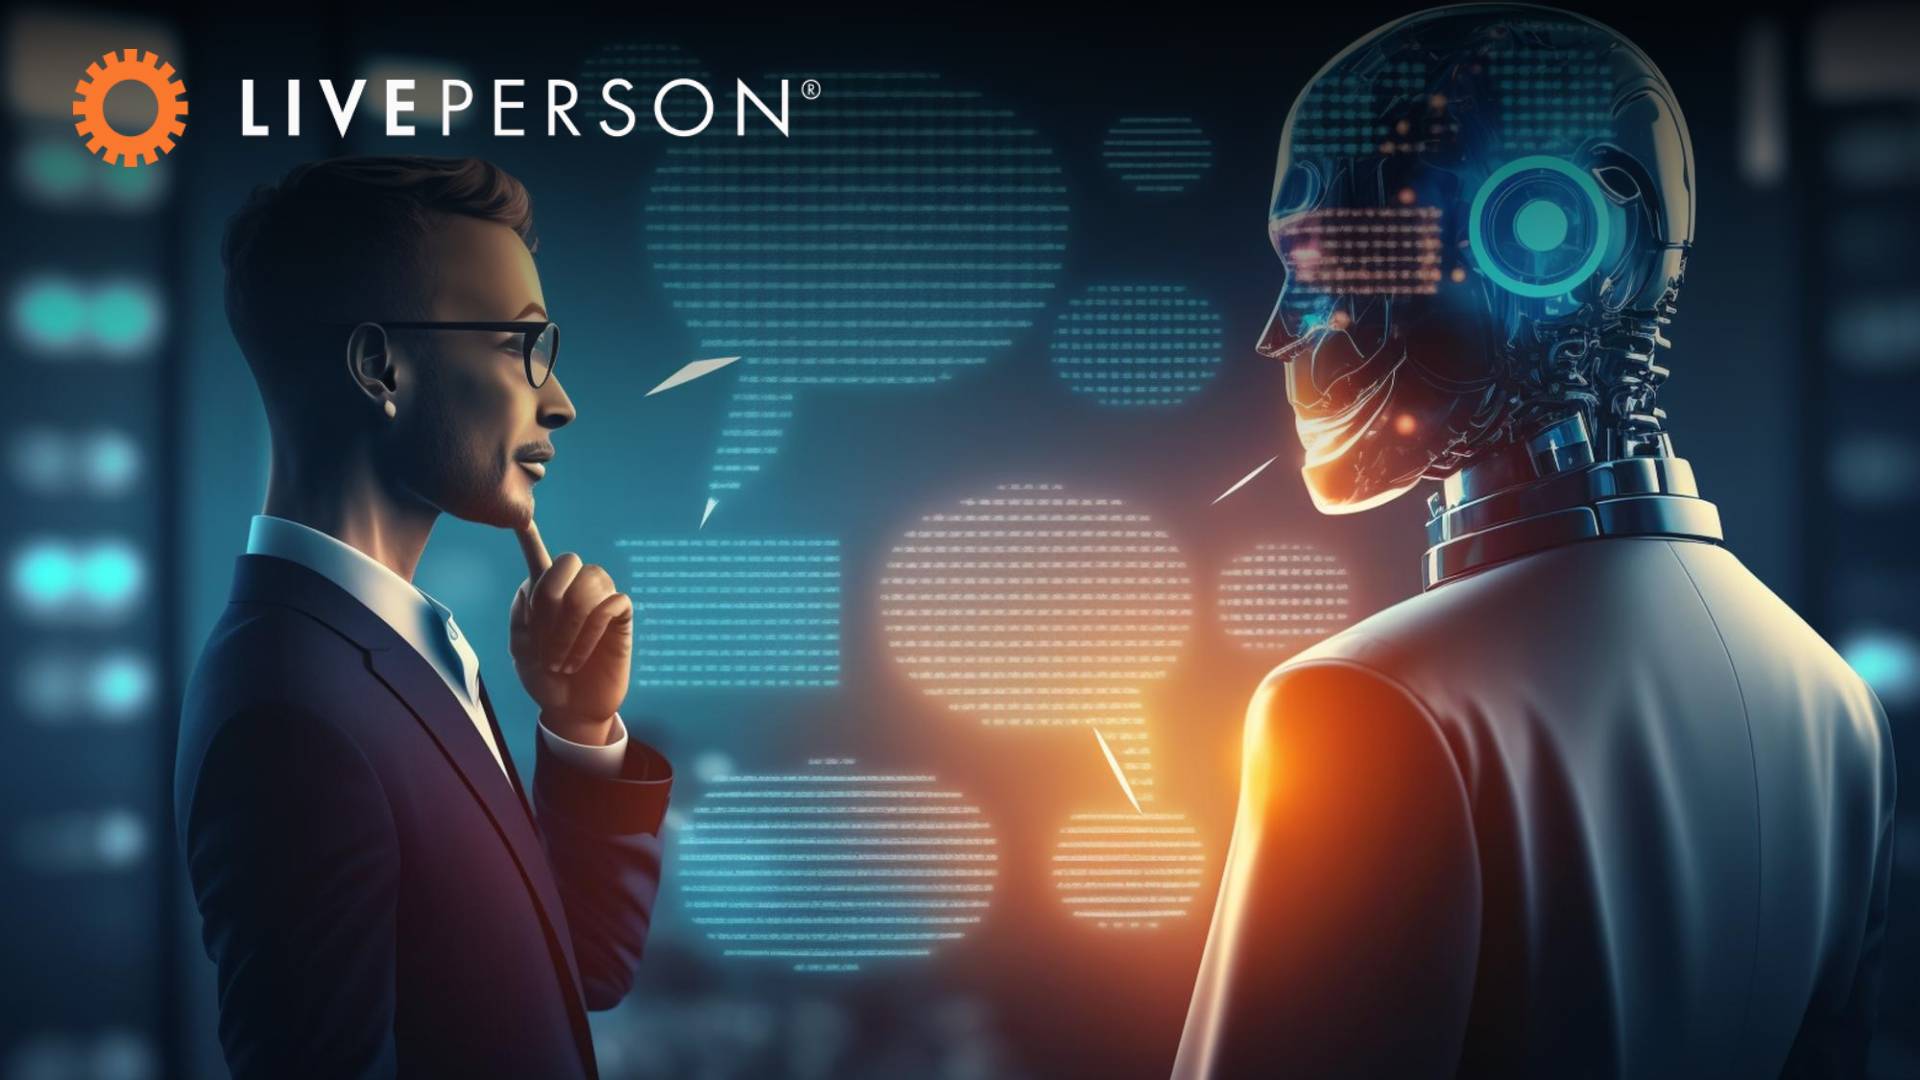 LivePerson Launches New AI Capabilities and Partnerships at Spark Event